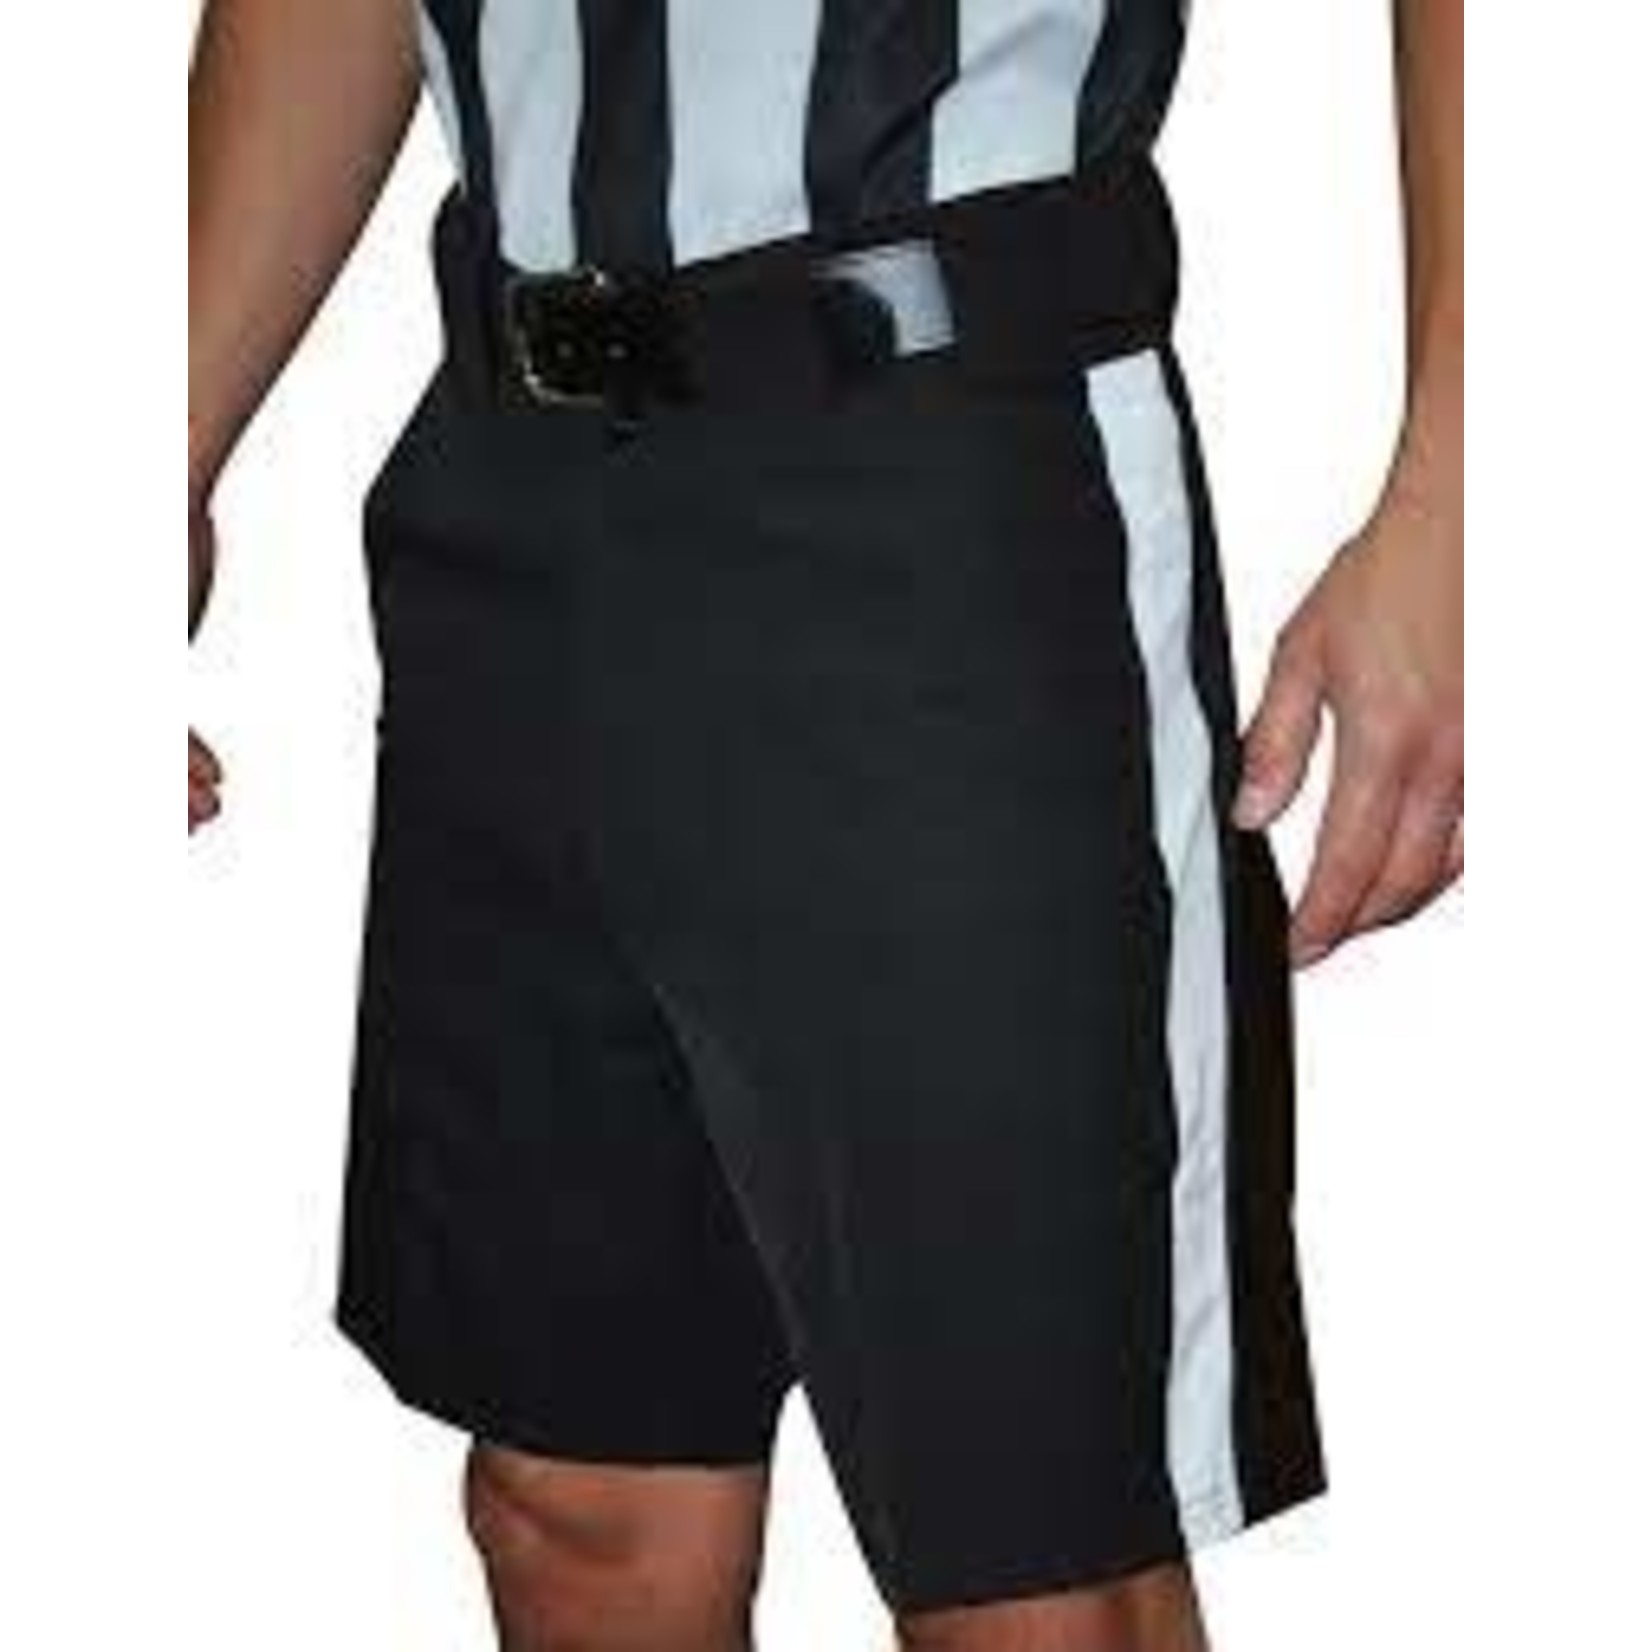 Smitty Smitty  Black Shorts with White Stripe and Non Slip Gripper Waistband